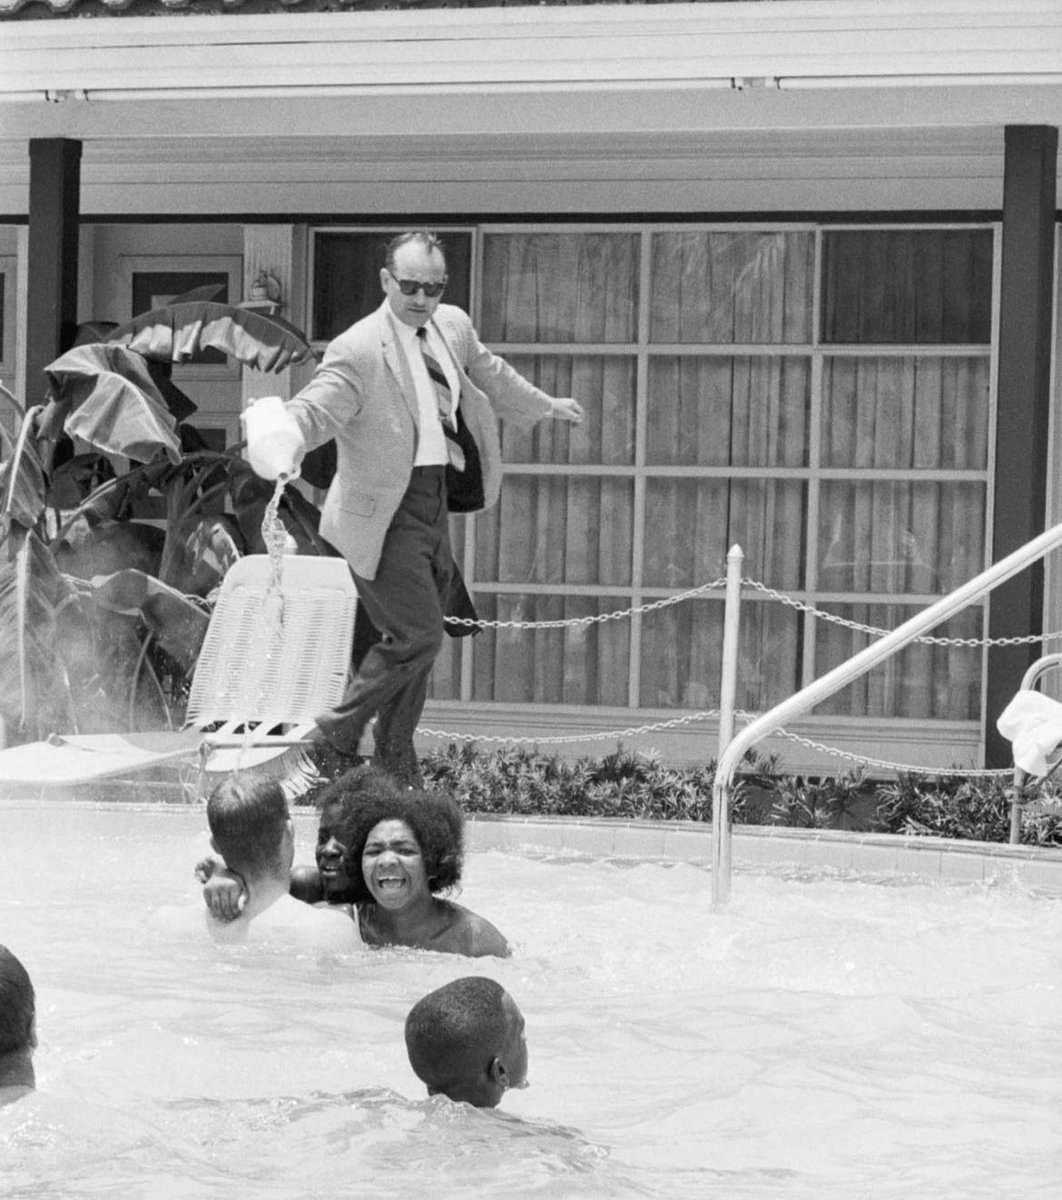 Motel manager James Brock pours Muriatic acid In the Monson Motor Lodge swimming pool, to get black swimmers out of the pool. June 18, 1964.